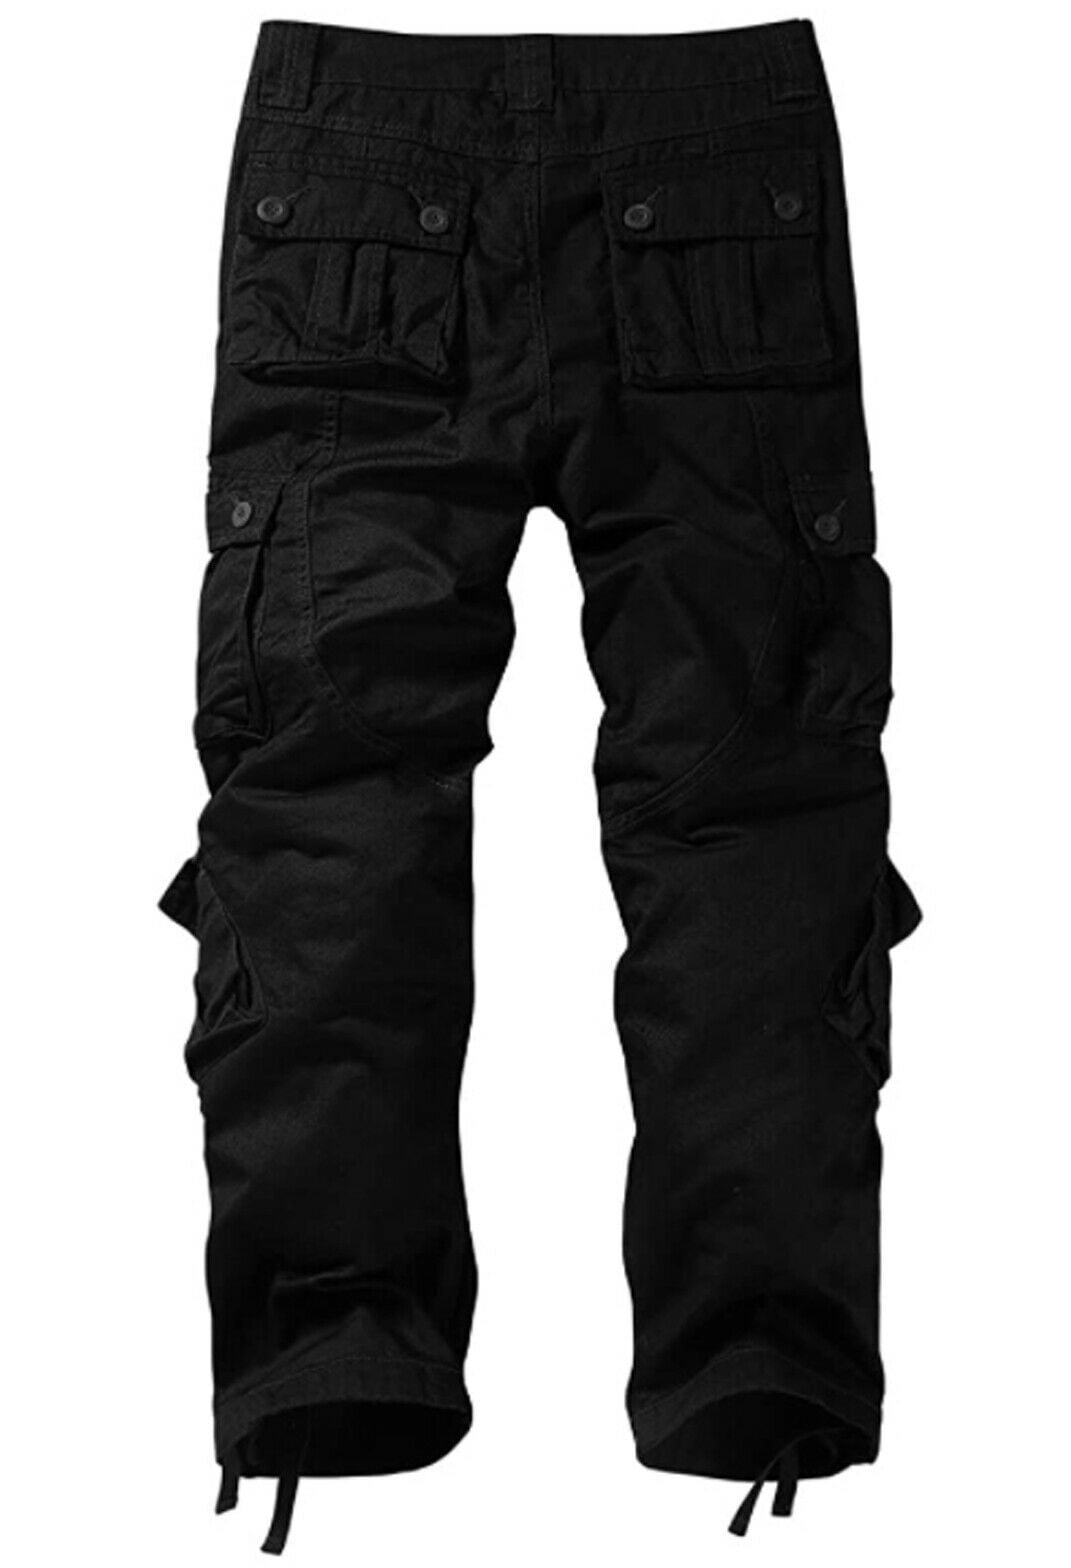 Outdoor Sport Men Pants Black Military Cargo Pant Army Pants Tactical  Trousers Wearable Climbing Hiking Pants  Wish